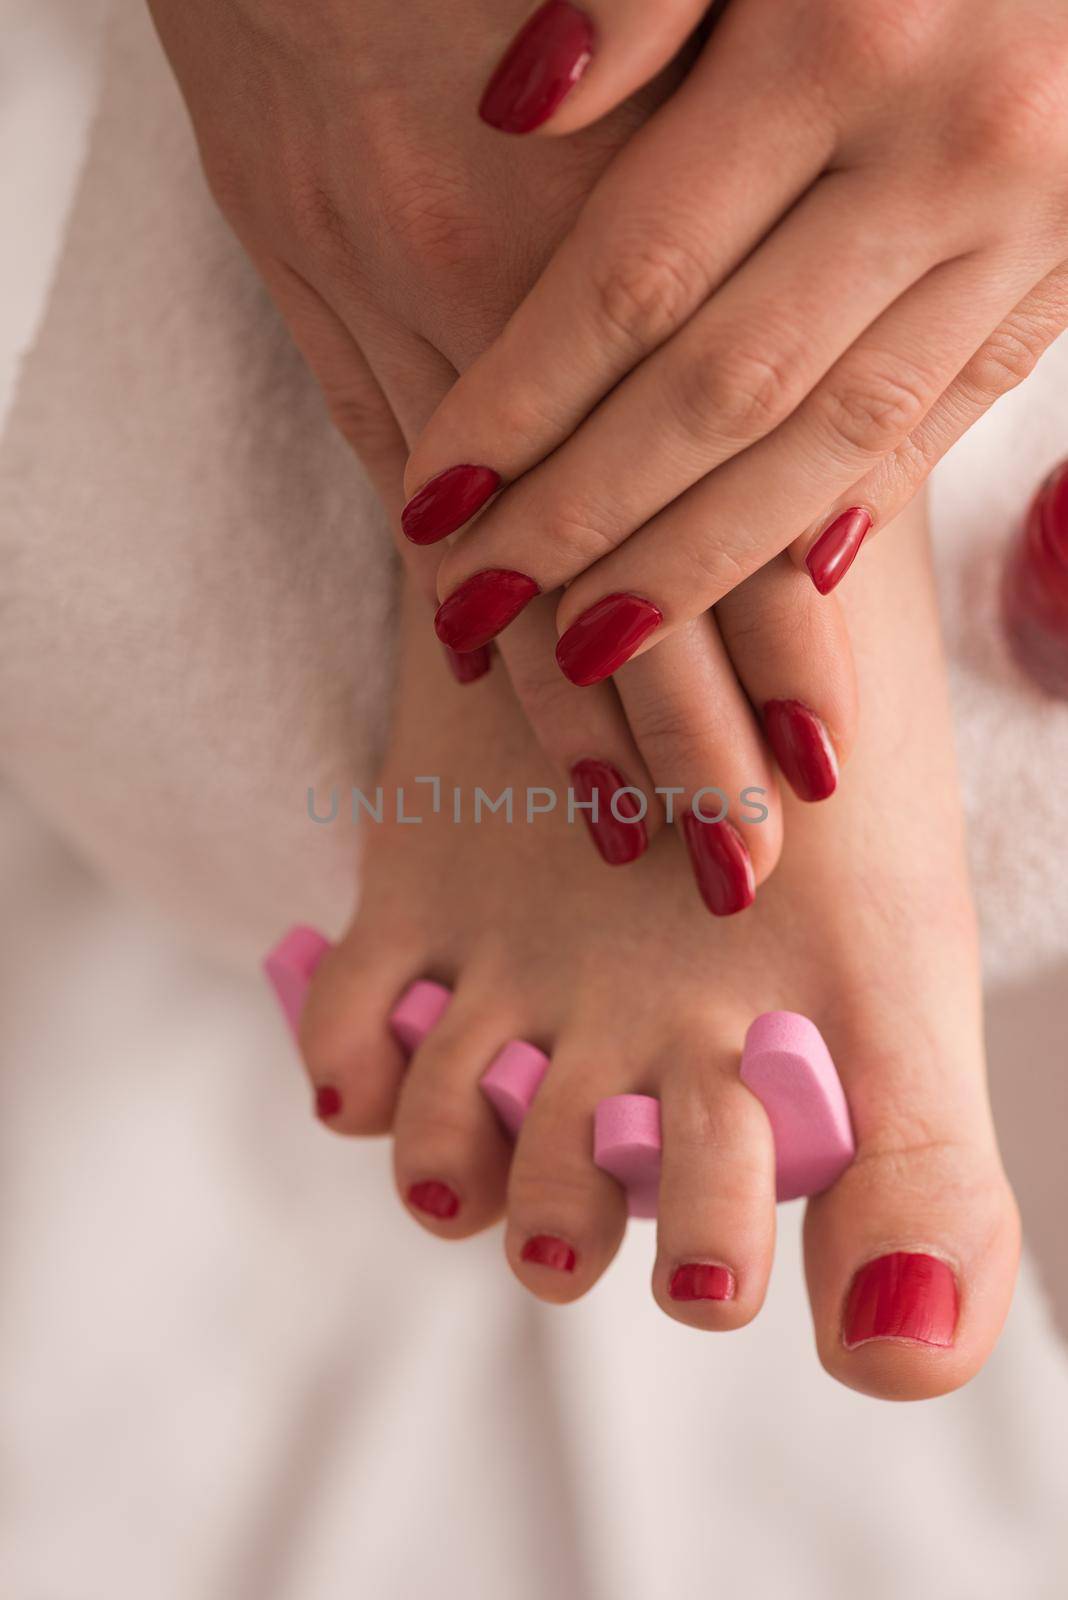 female feet and hands at spa salon by dotshock